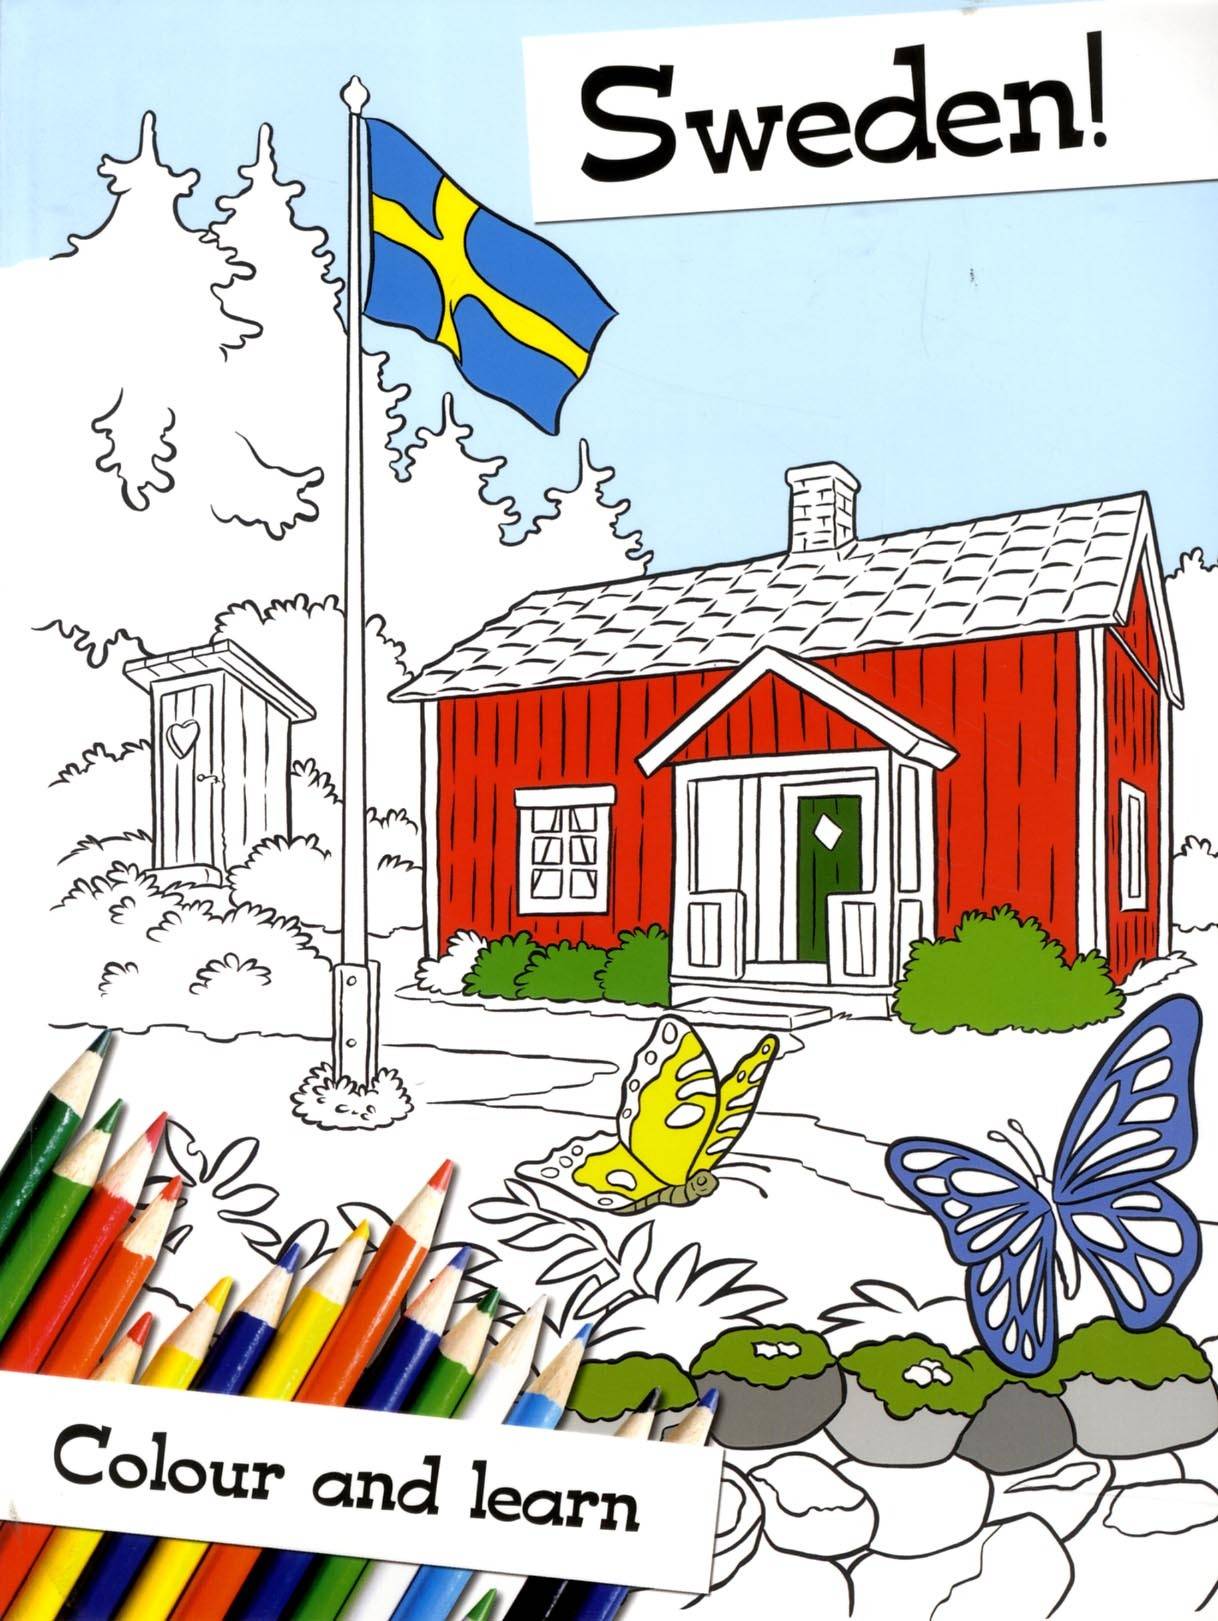 Sweden! : colour and learn